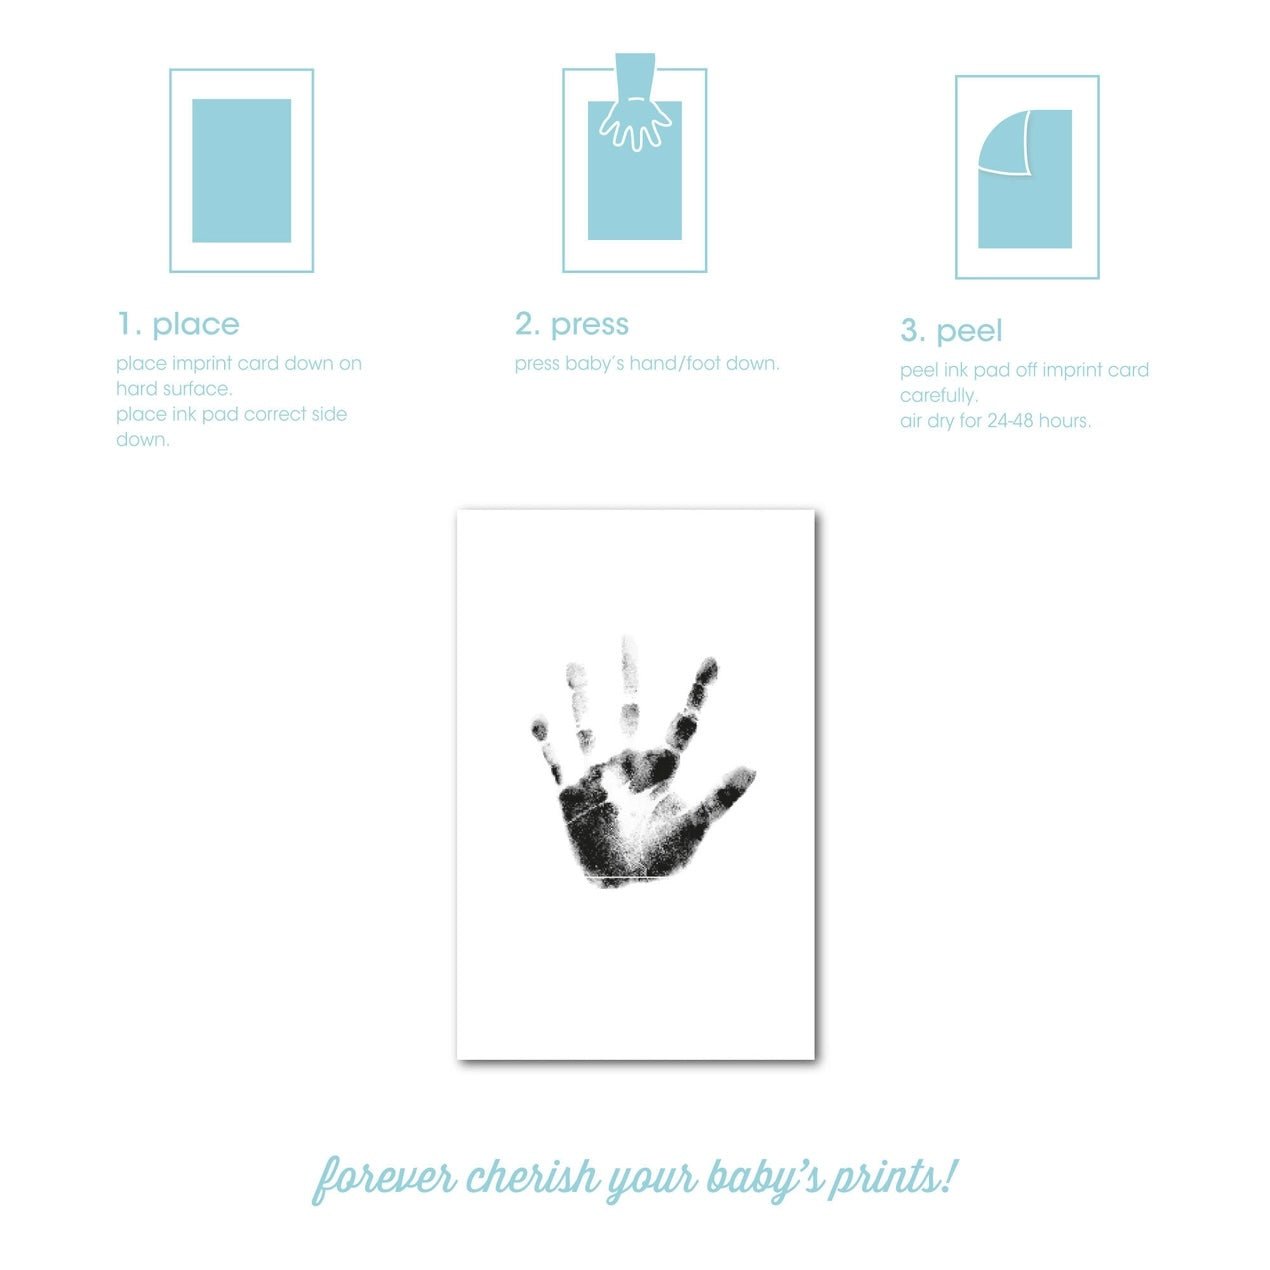 Baby Footprint Clean-Touch Ink Pad